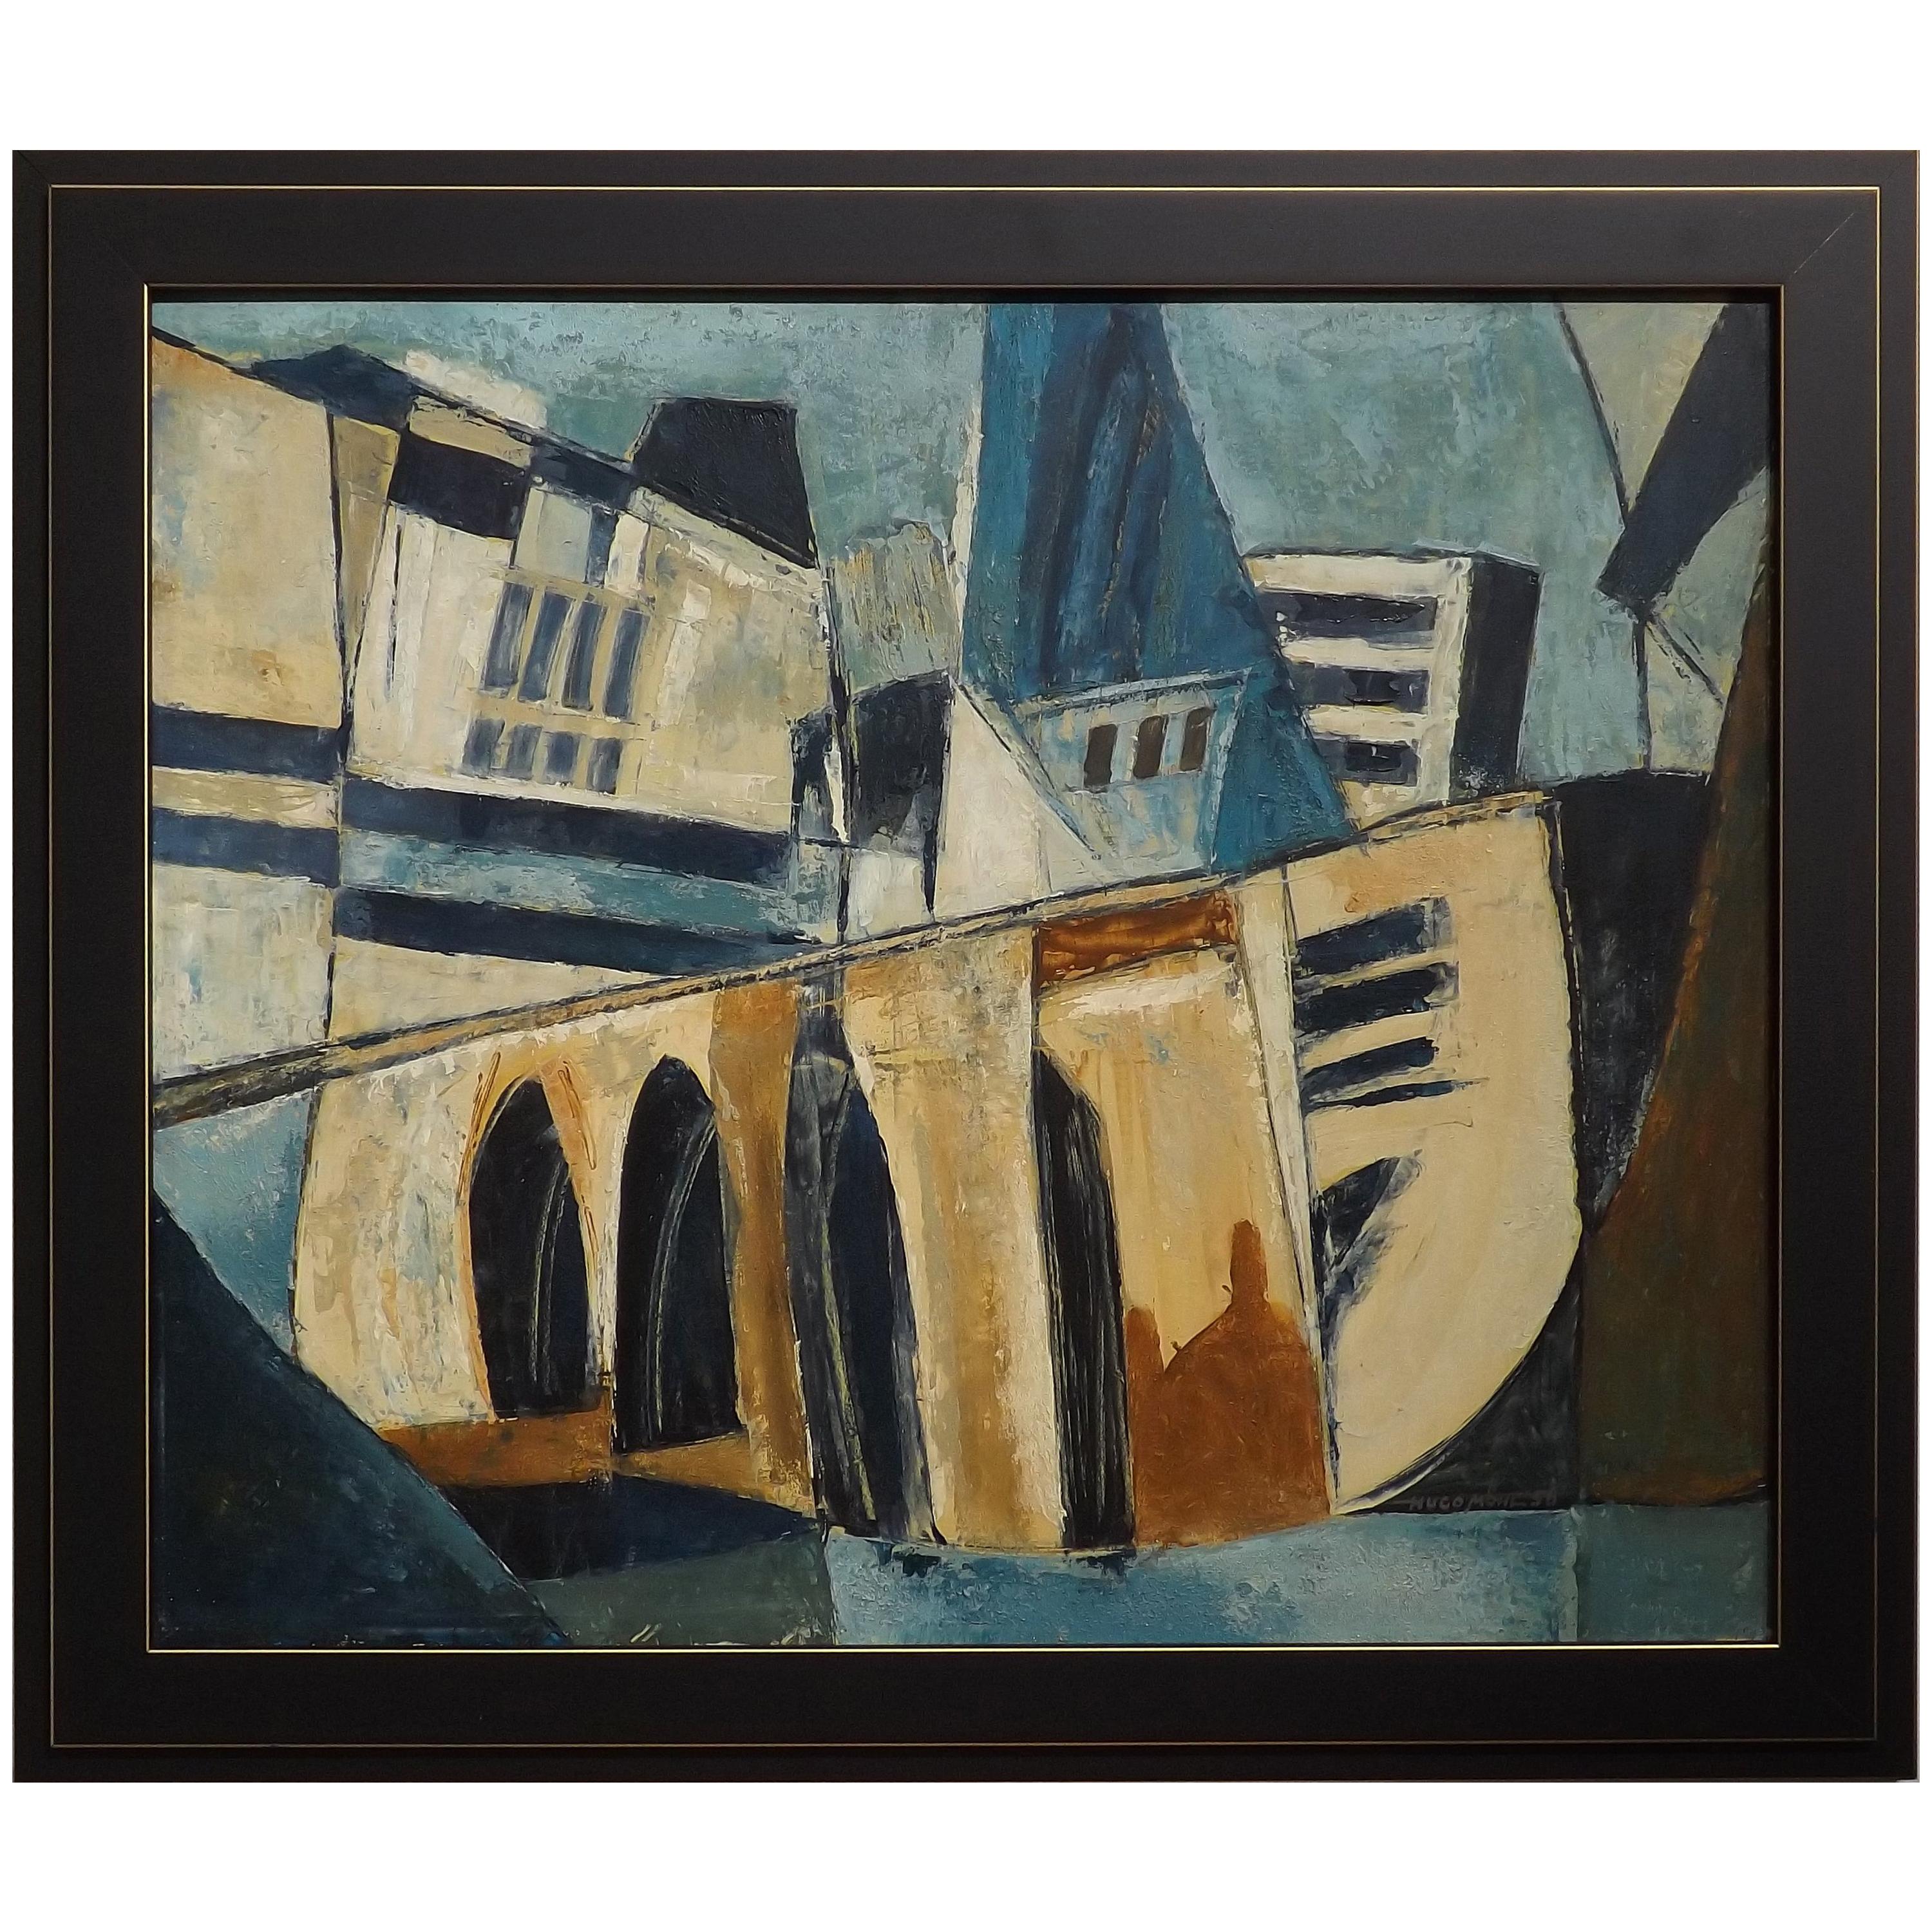 Hugo Mohl 'Die Brucke' / 'the Bridge' Midcentury Abstract Painting, Dated 1956